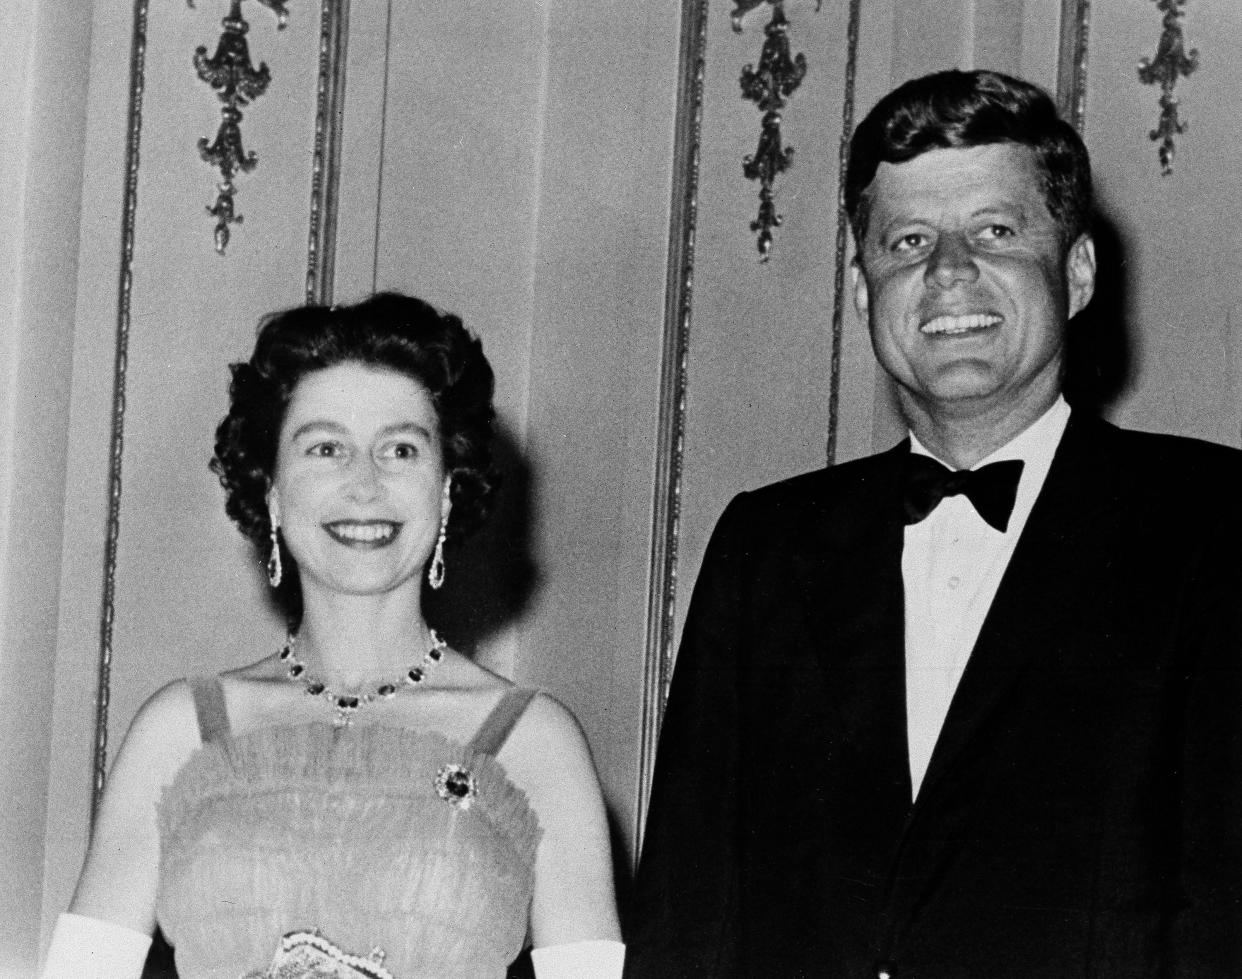 Queen Elizabeth II and President John F. Kennedy (35th president) pose at Buckingham Palace in London on June 5, 1961.  The Kennedys were dinner guests of the Queen.